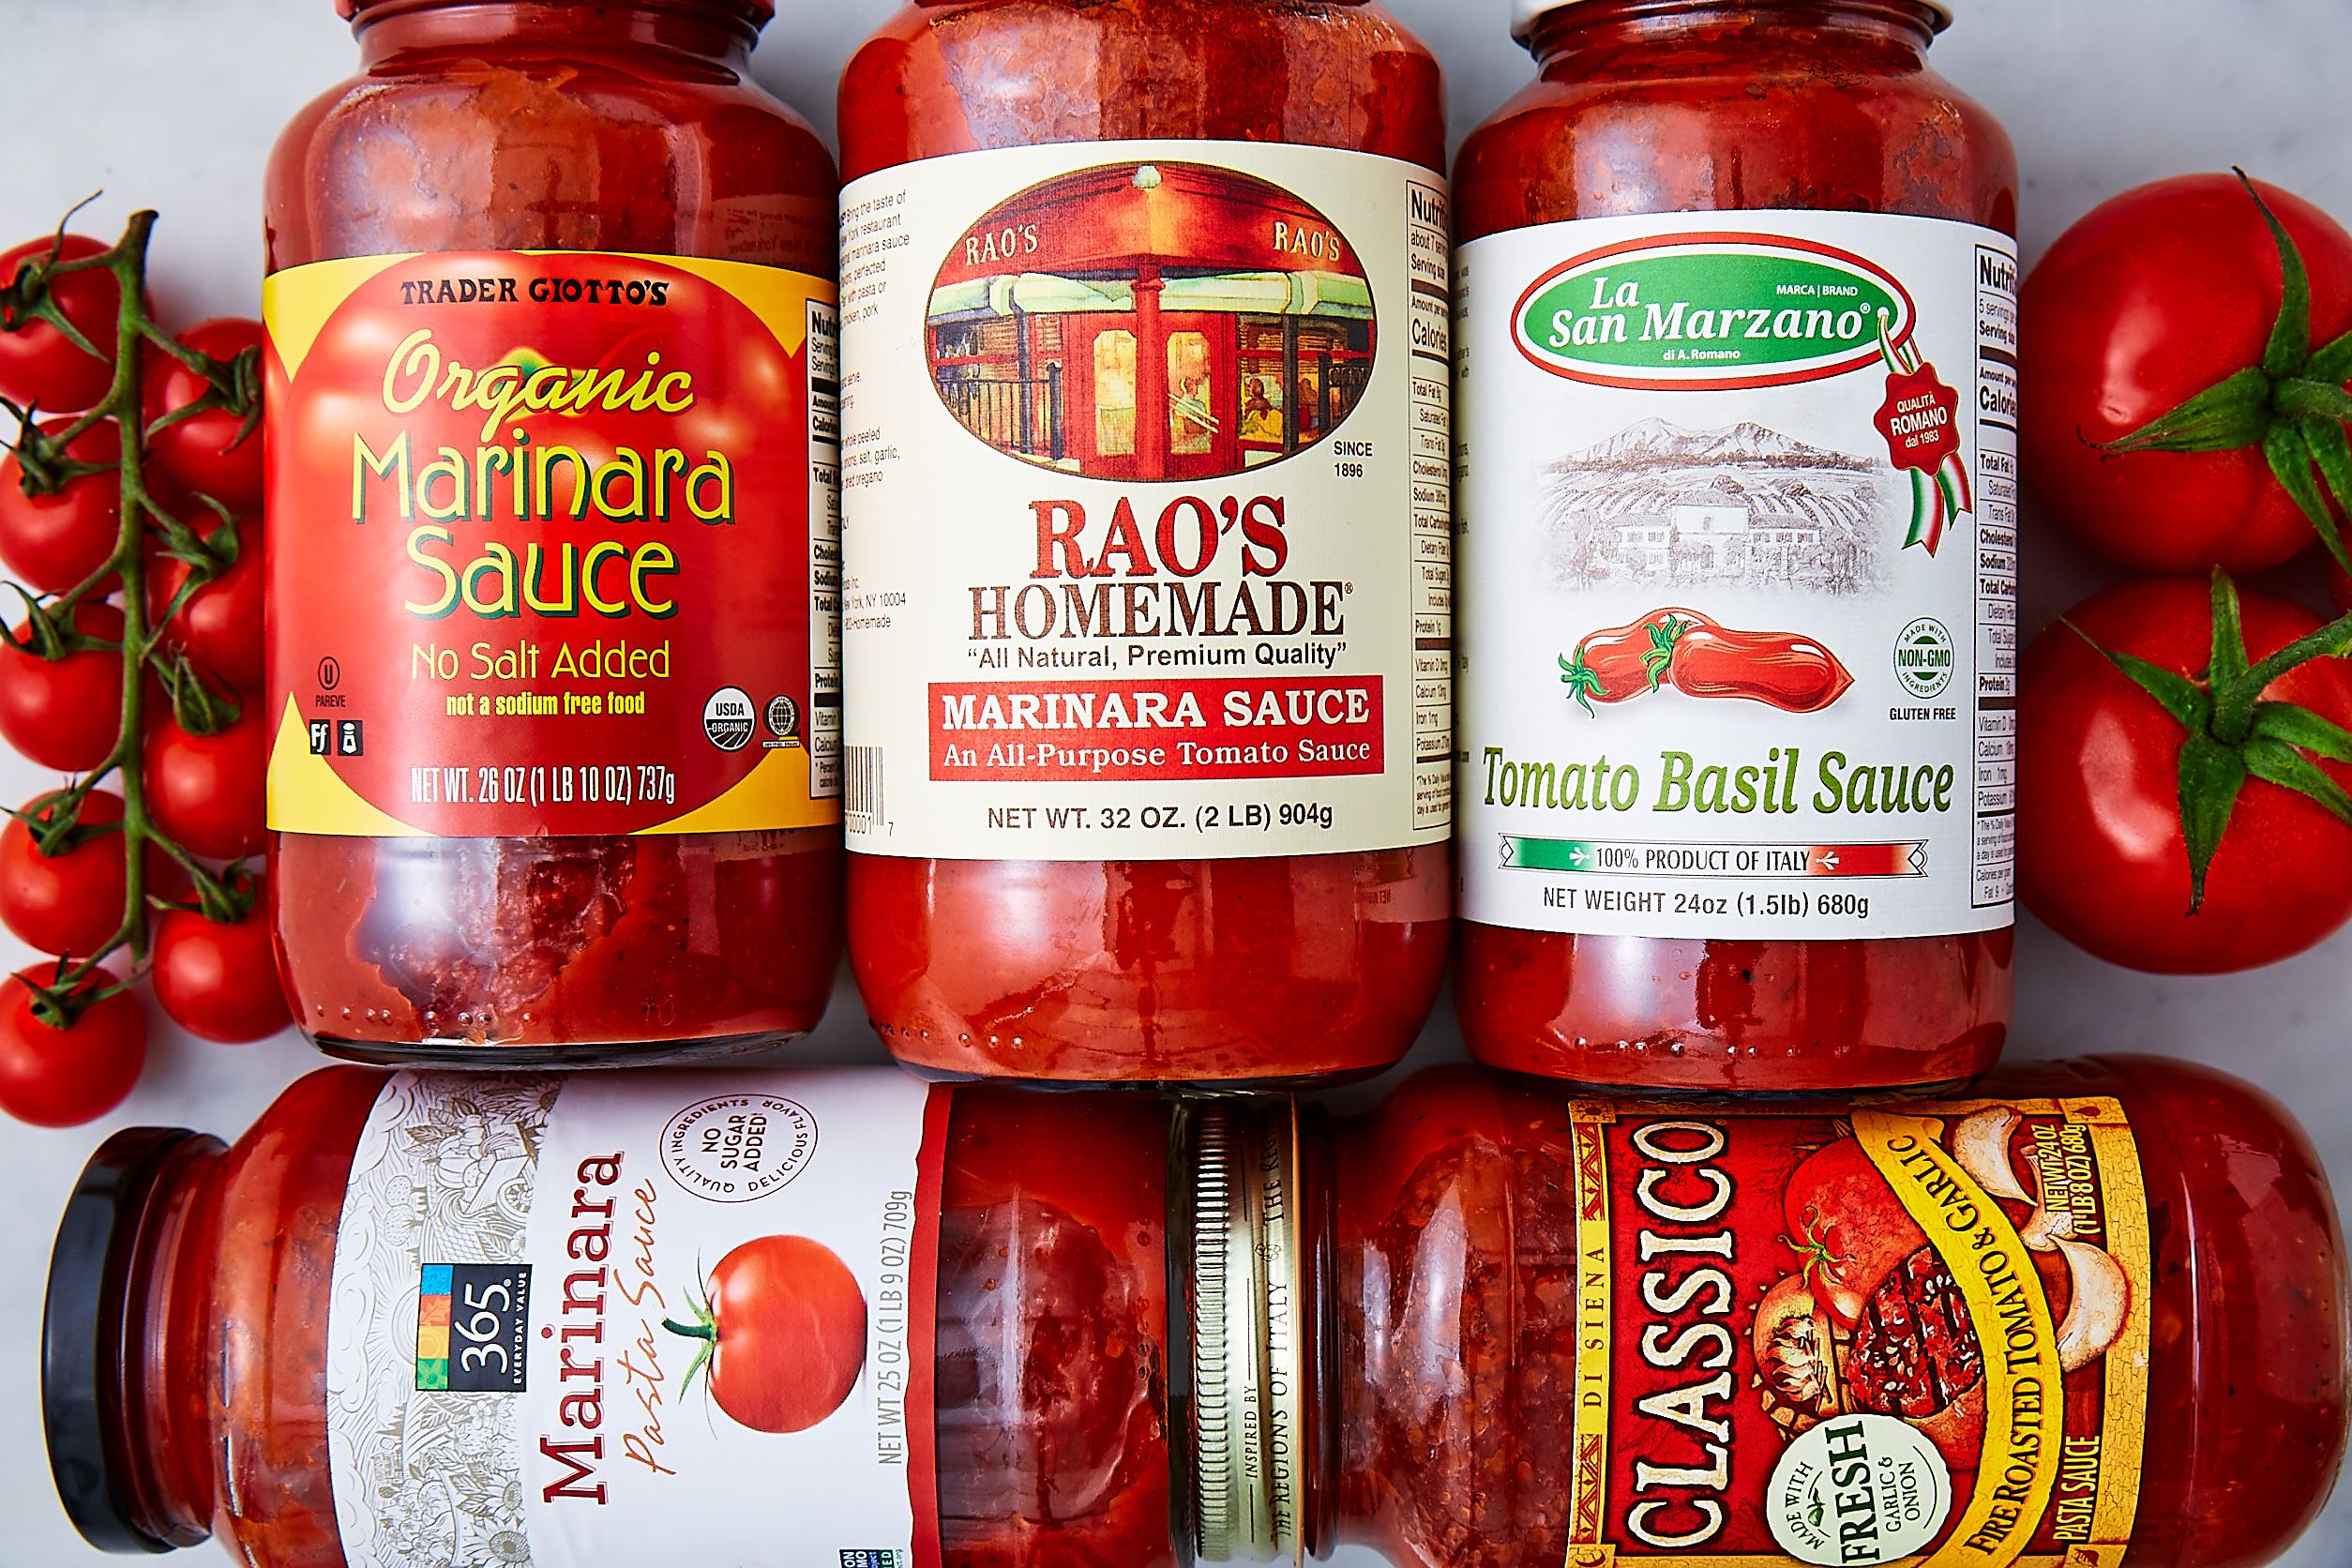 11 Best Pasta Sauce Brands - Store Bought Spaghetti Sauces, Ranked